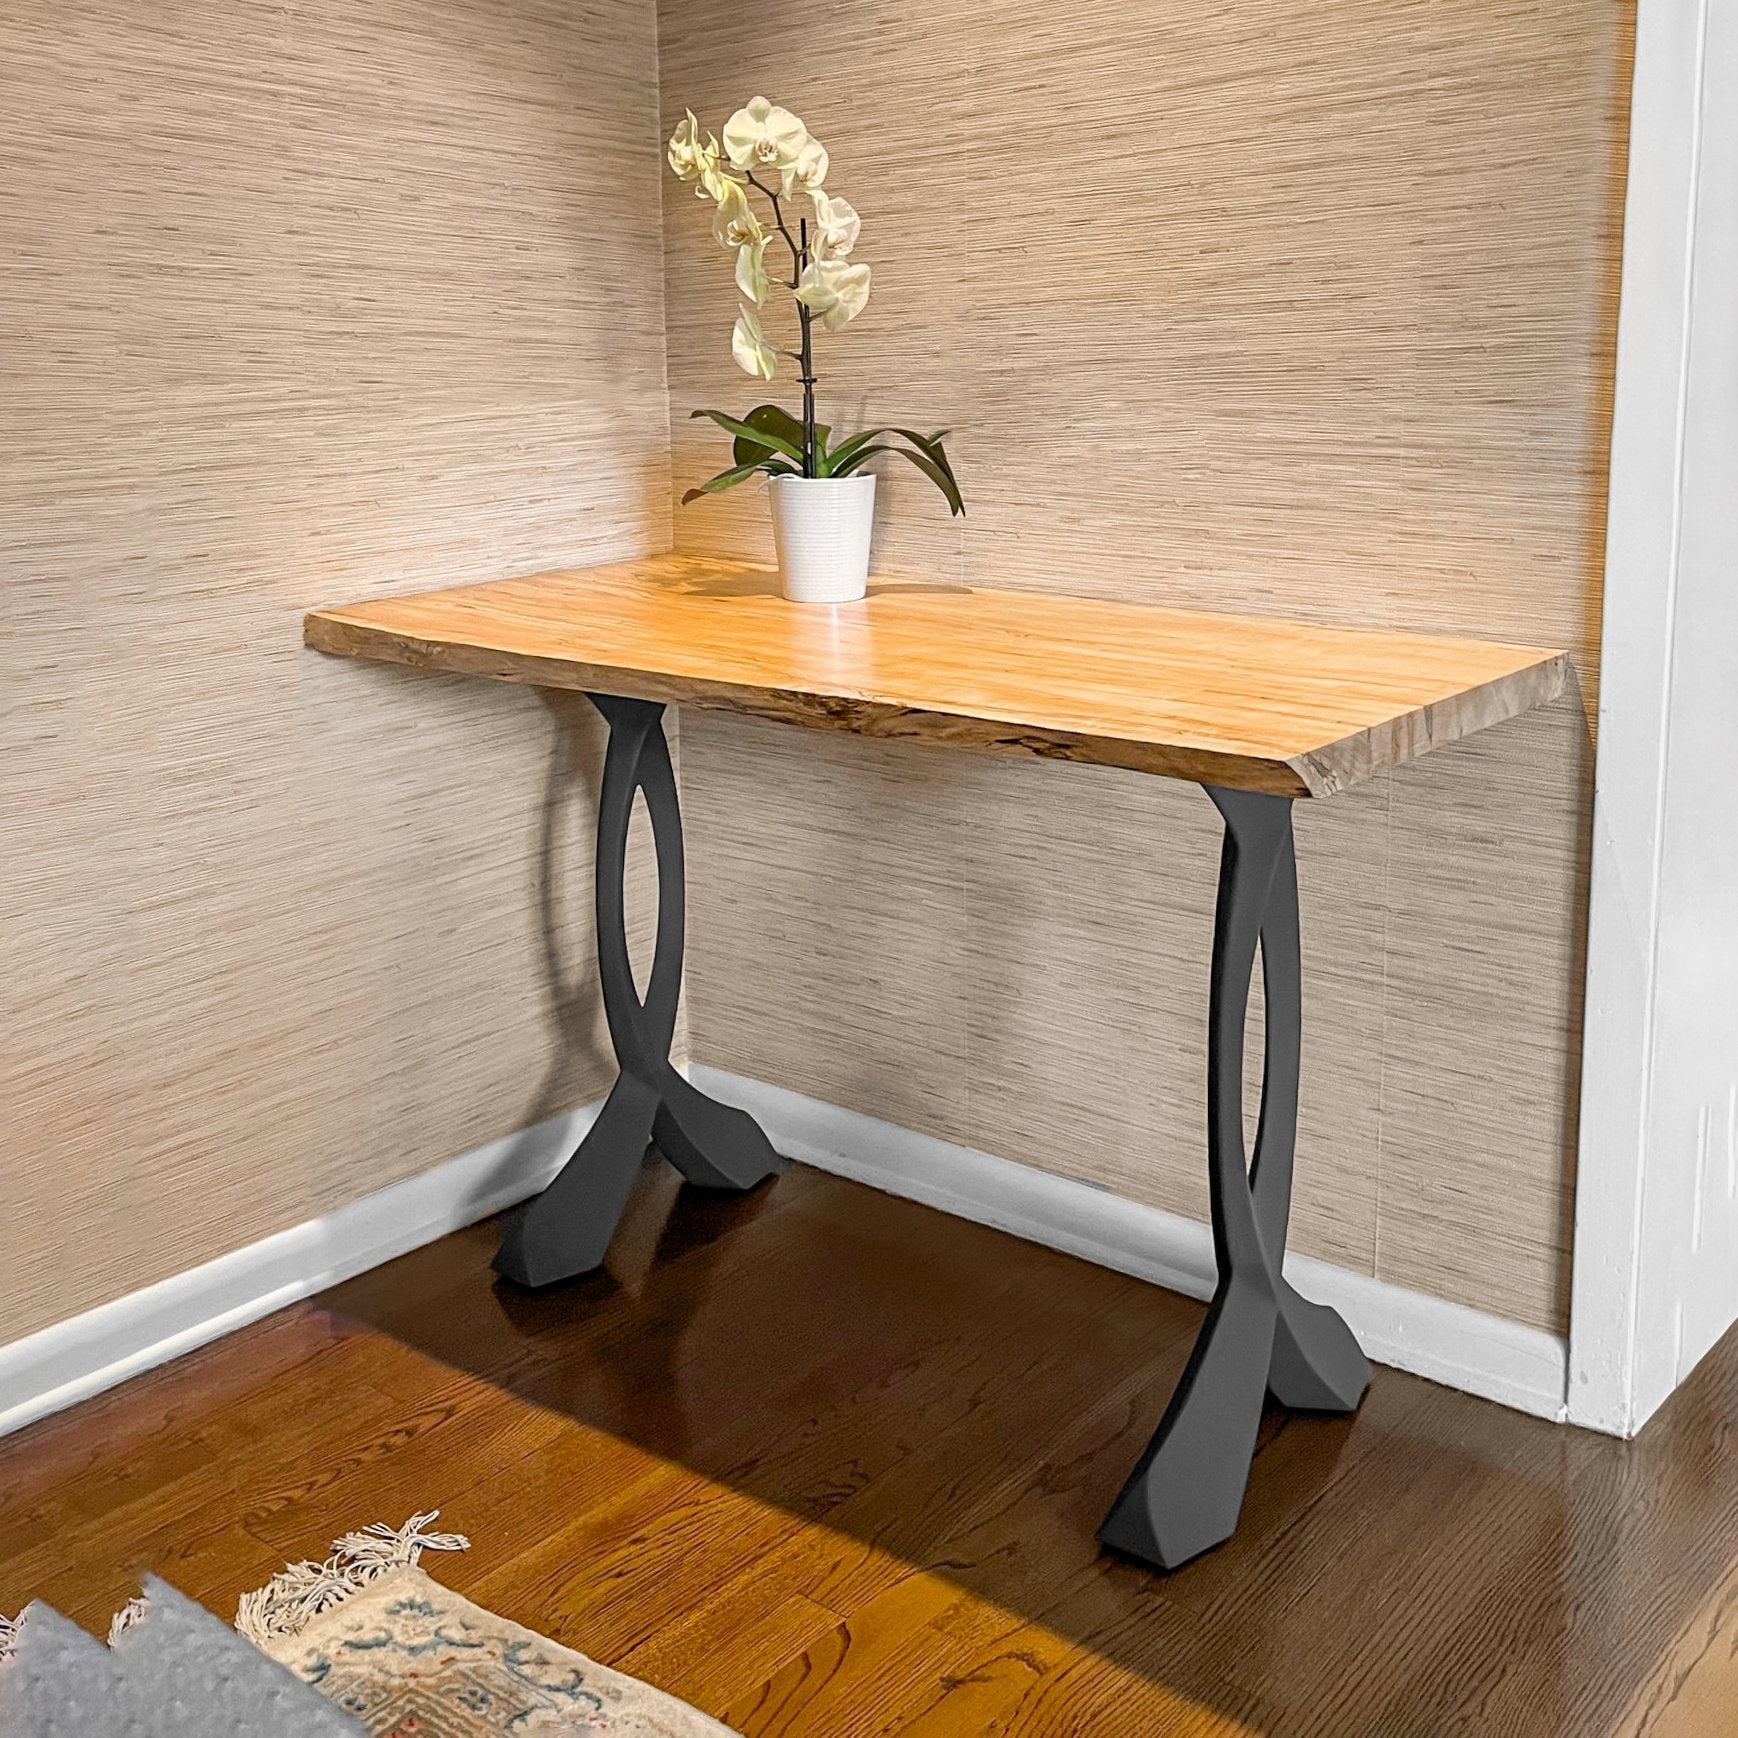 A console table is also a great way to fill up floor space and add an extra layer of elegance to your living room